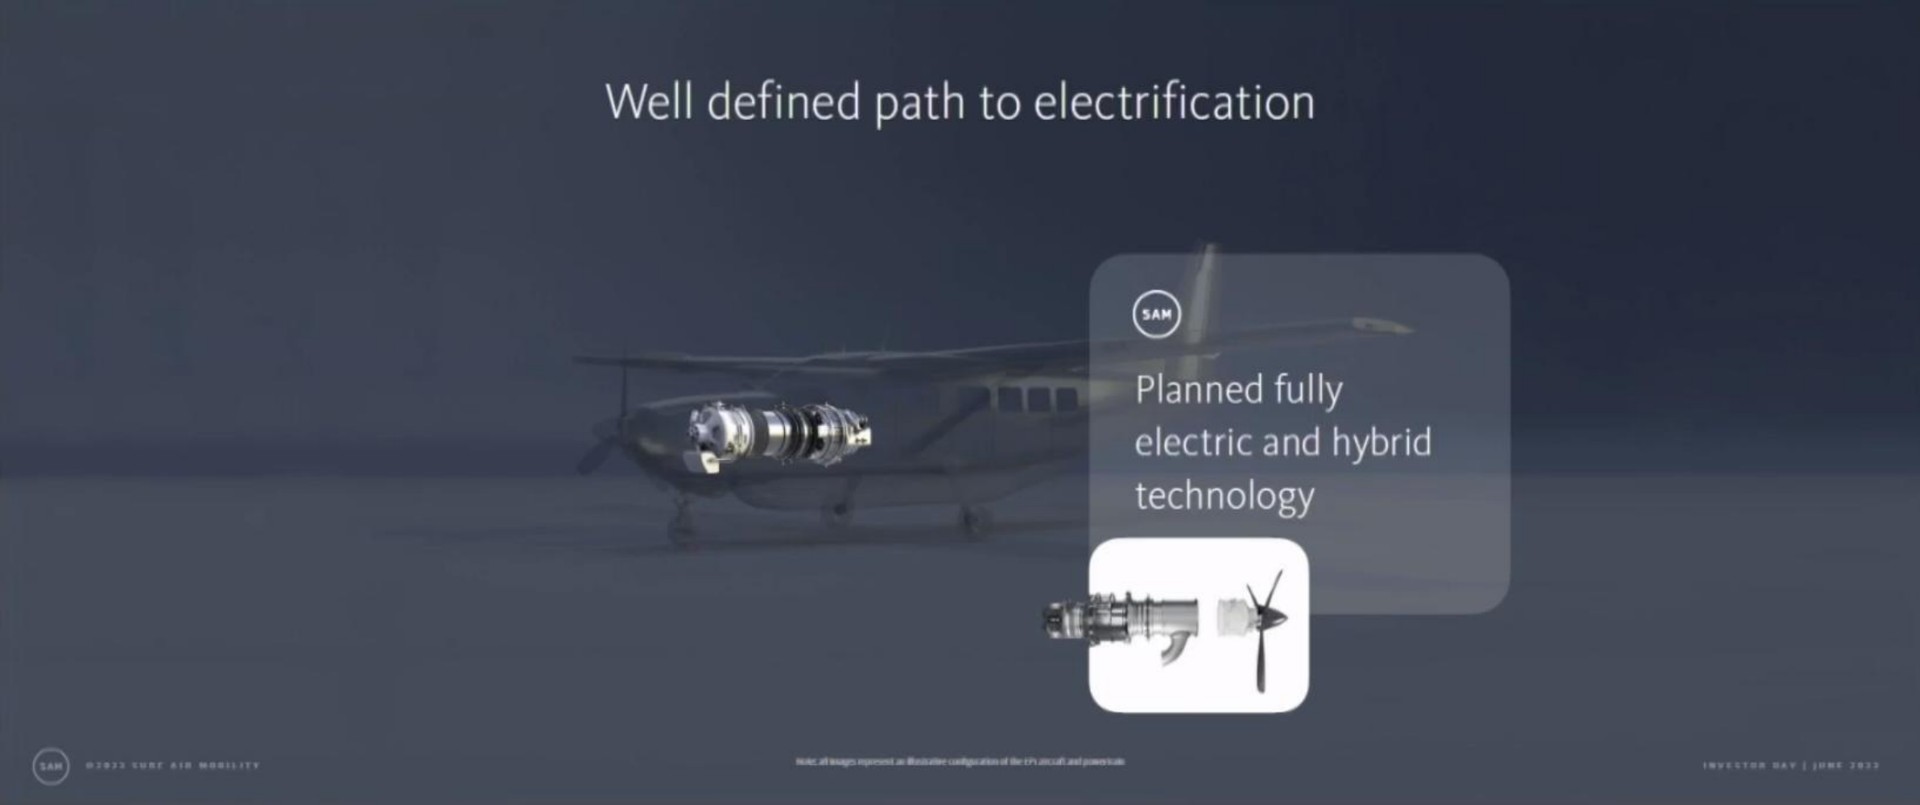 well defined path to electrification planned fully electric and hybrid technology | Surf Air